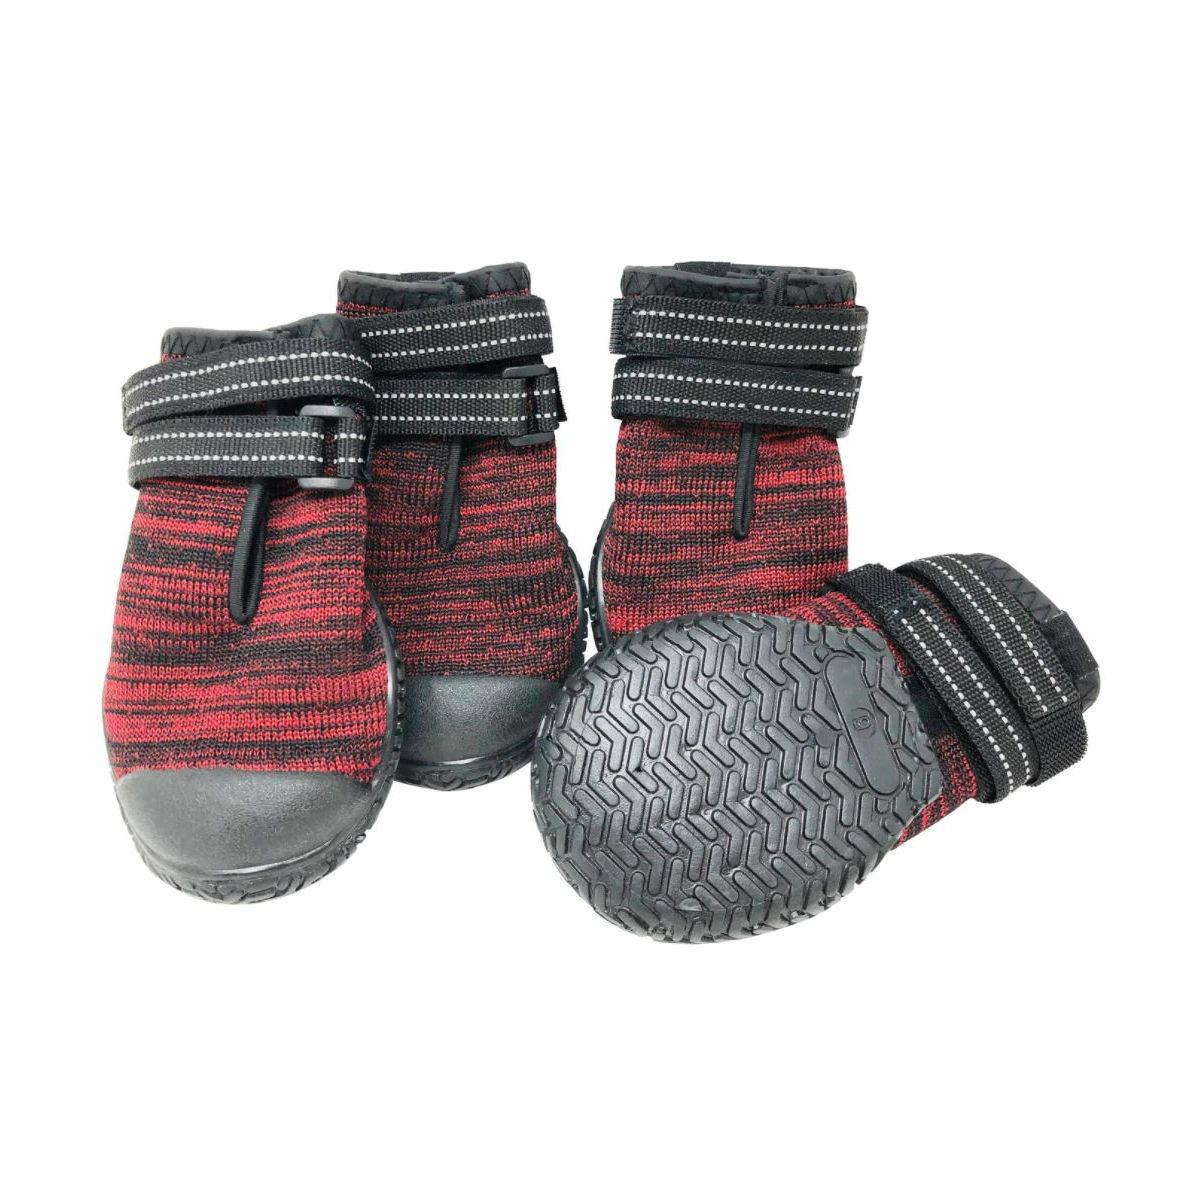 Pet Life Mud-Trax Ankle Supporting Dog Shoes - Red